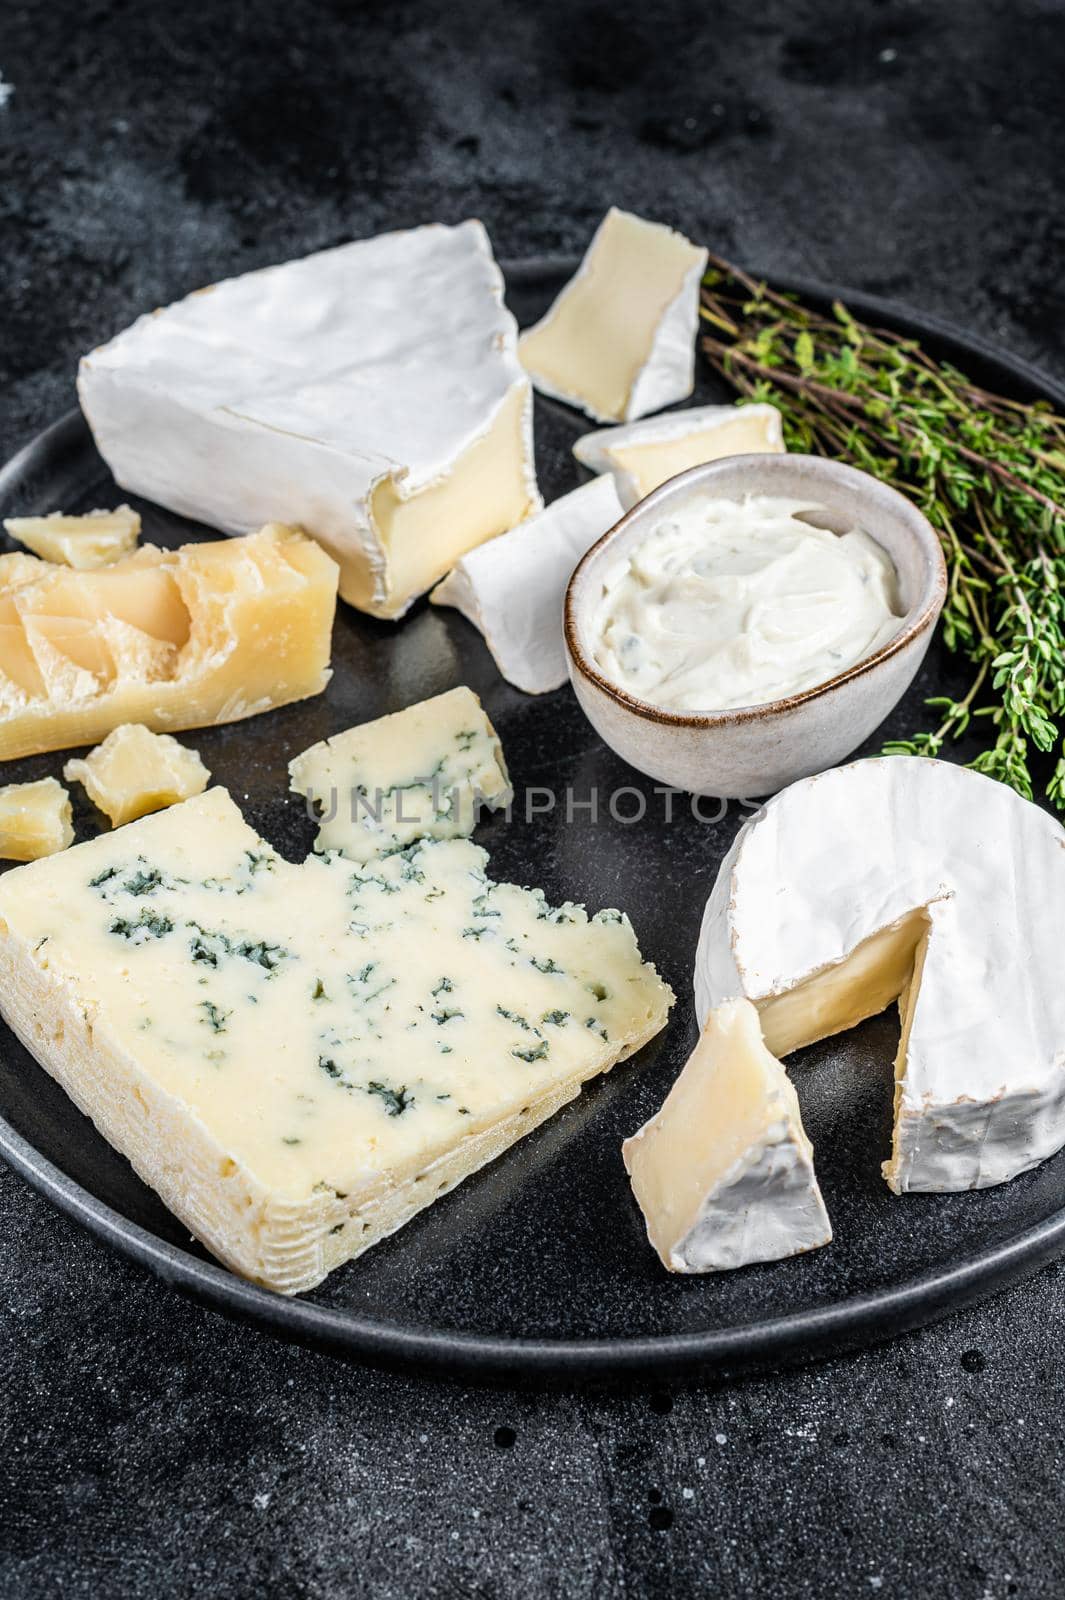 French Cheese plate. Camembert, Brie, Gorgonzola and blue cream cheese. Black background. Top view by Composter